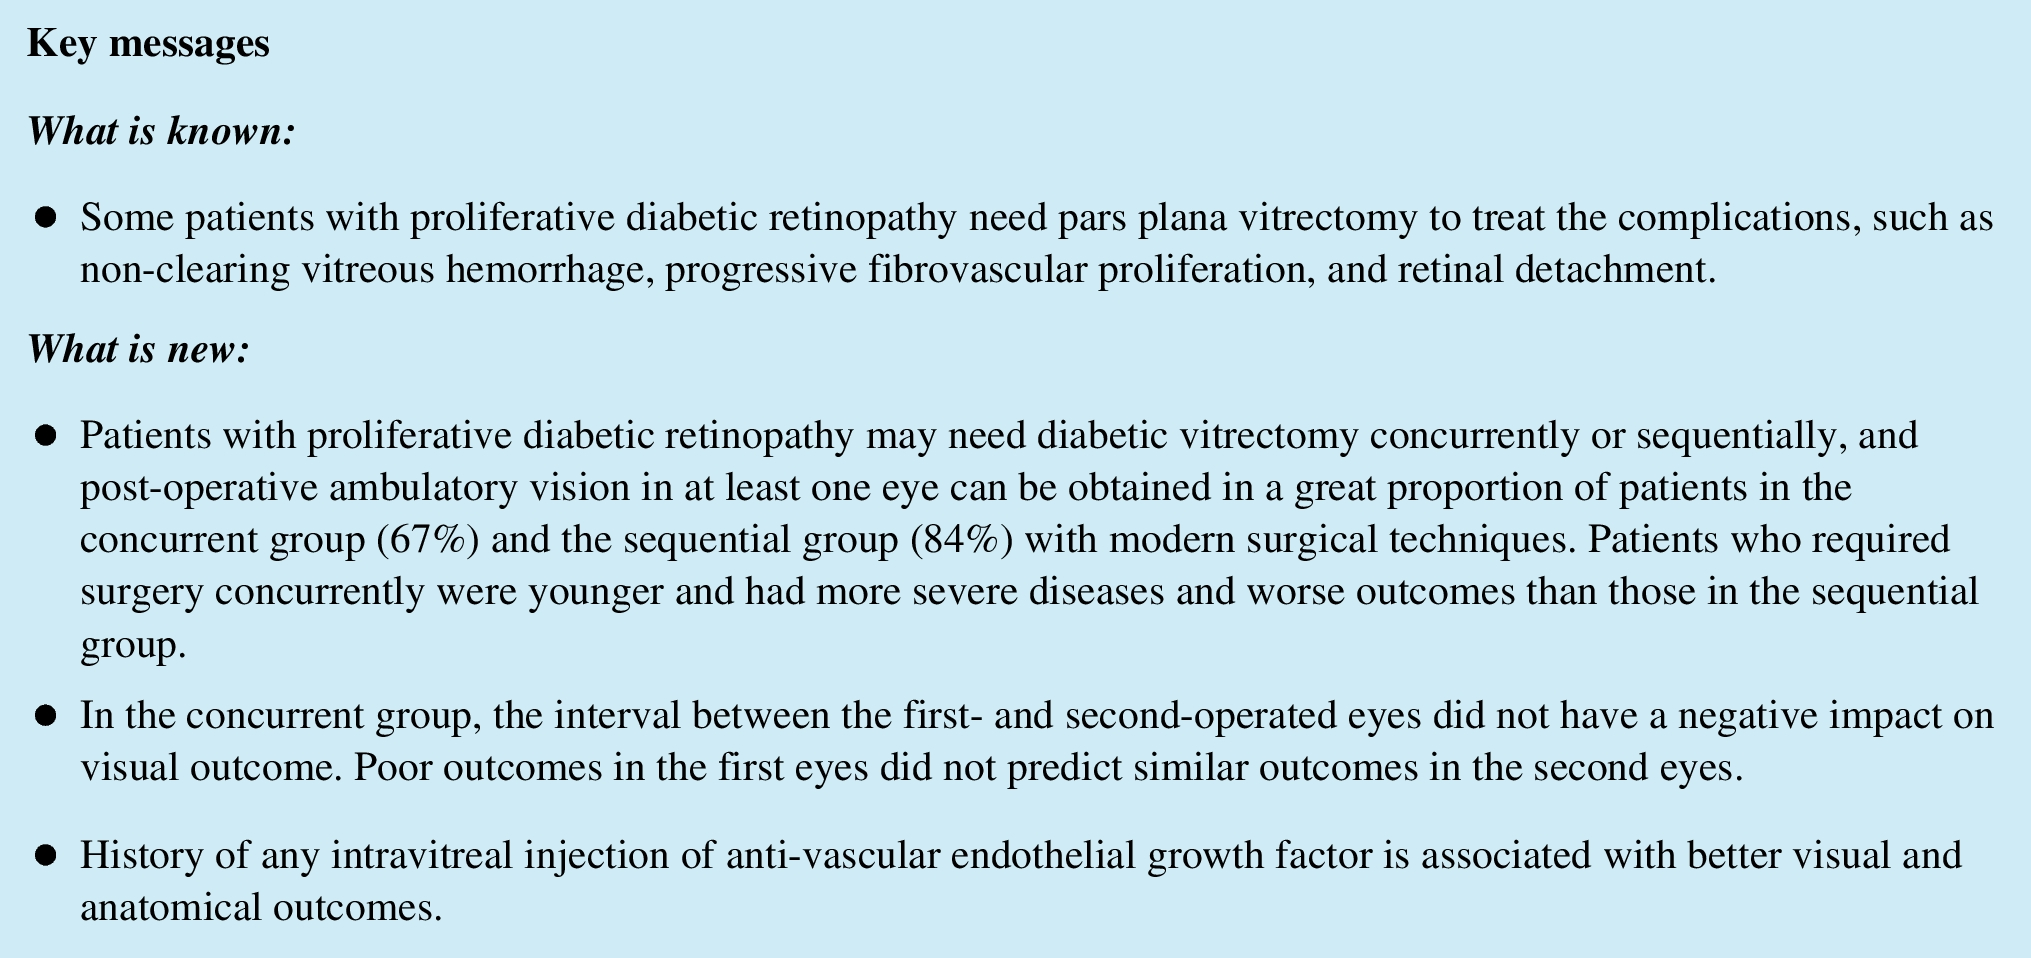 Bilateral vitrectomy in patients with proliferative diabetic retinopathy—characteristics and surgical outcomes